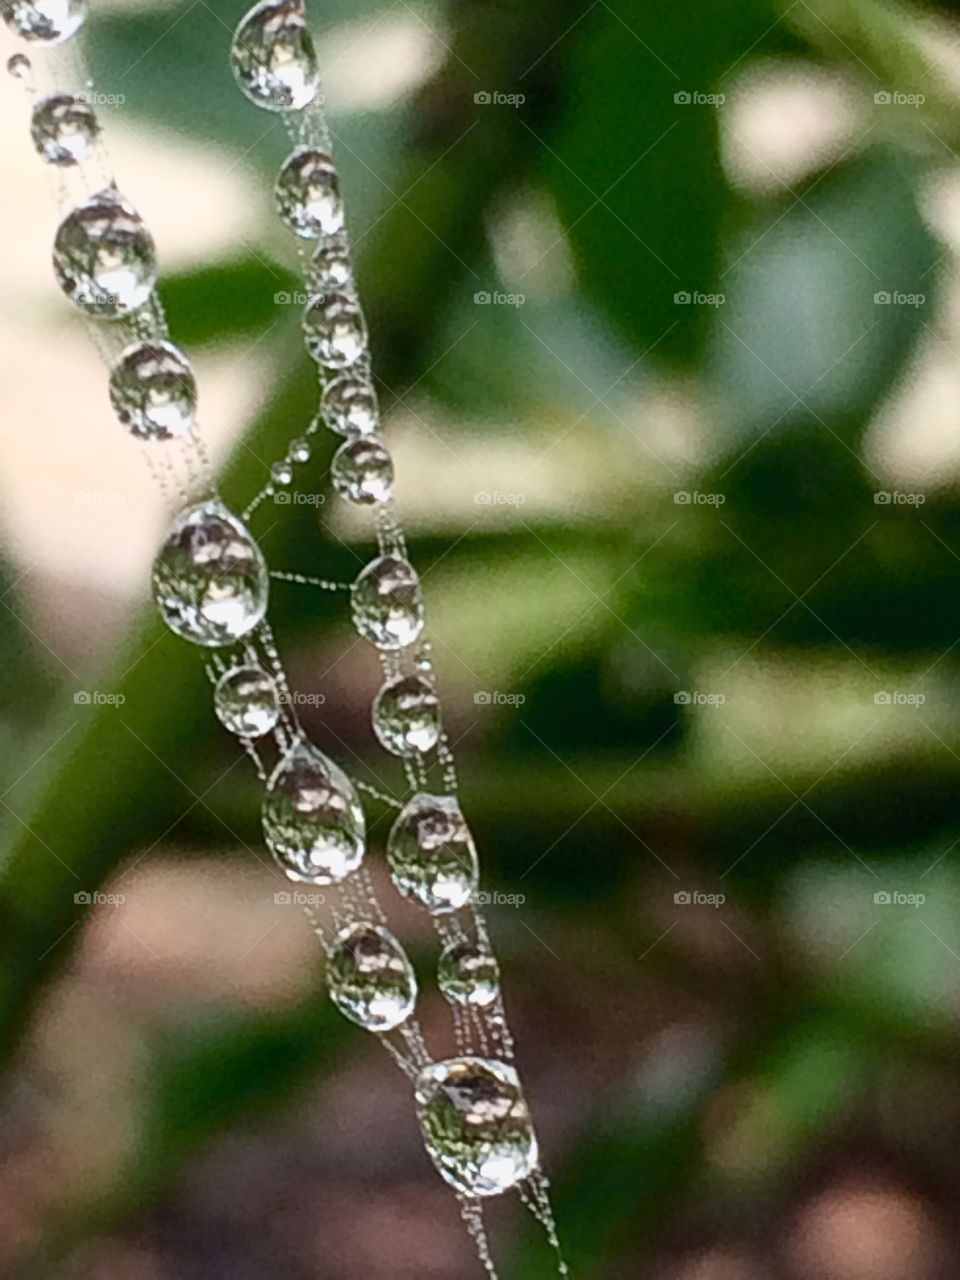 Dew drops on spider's web